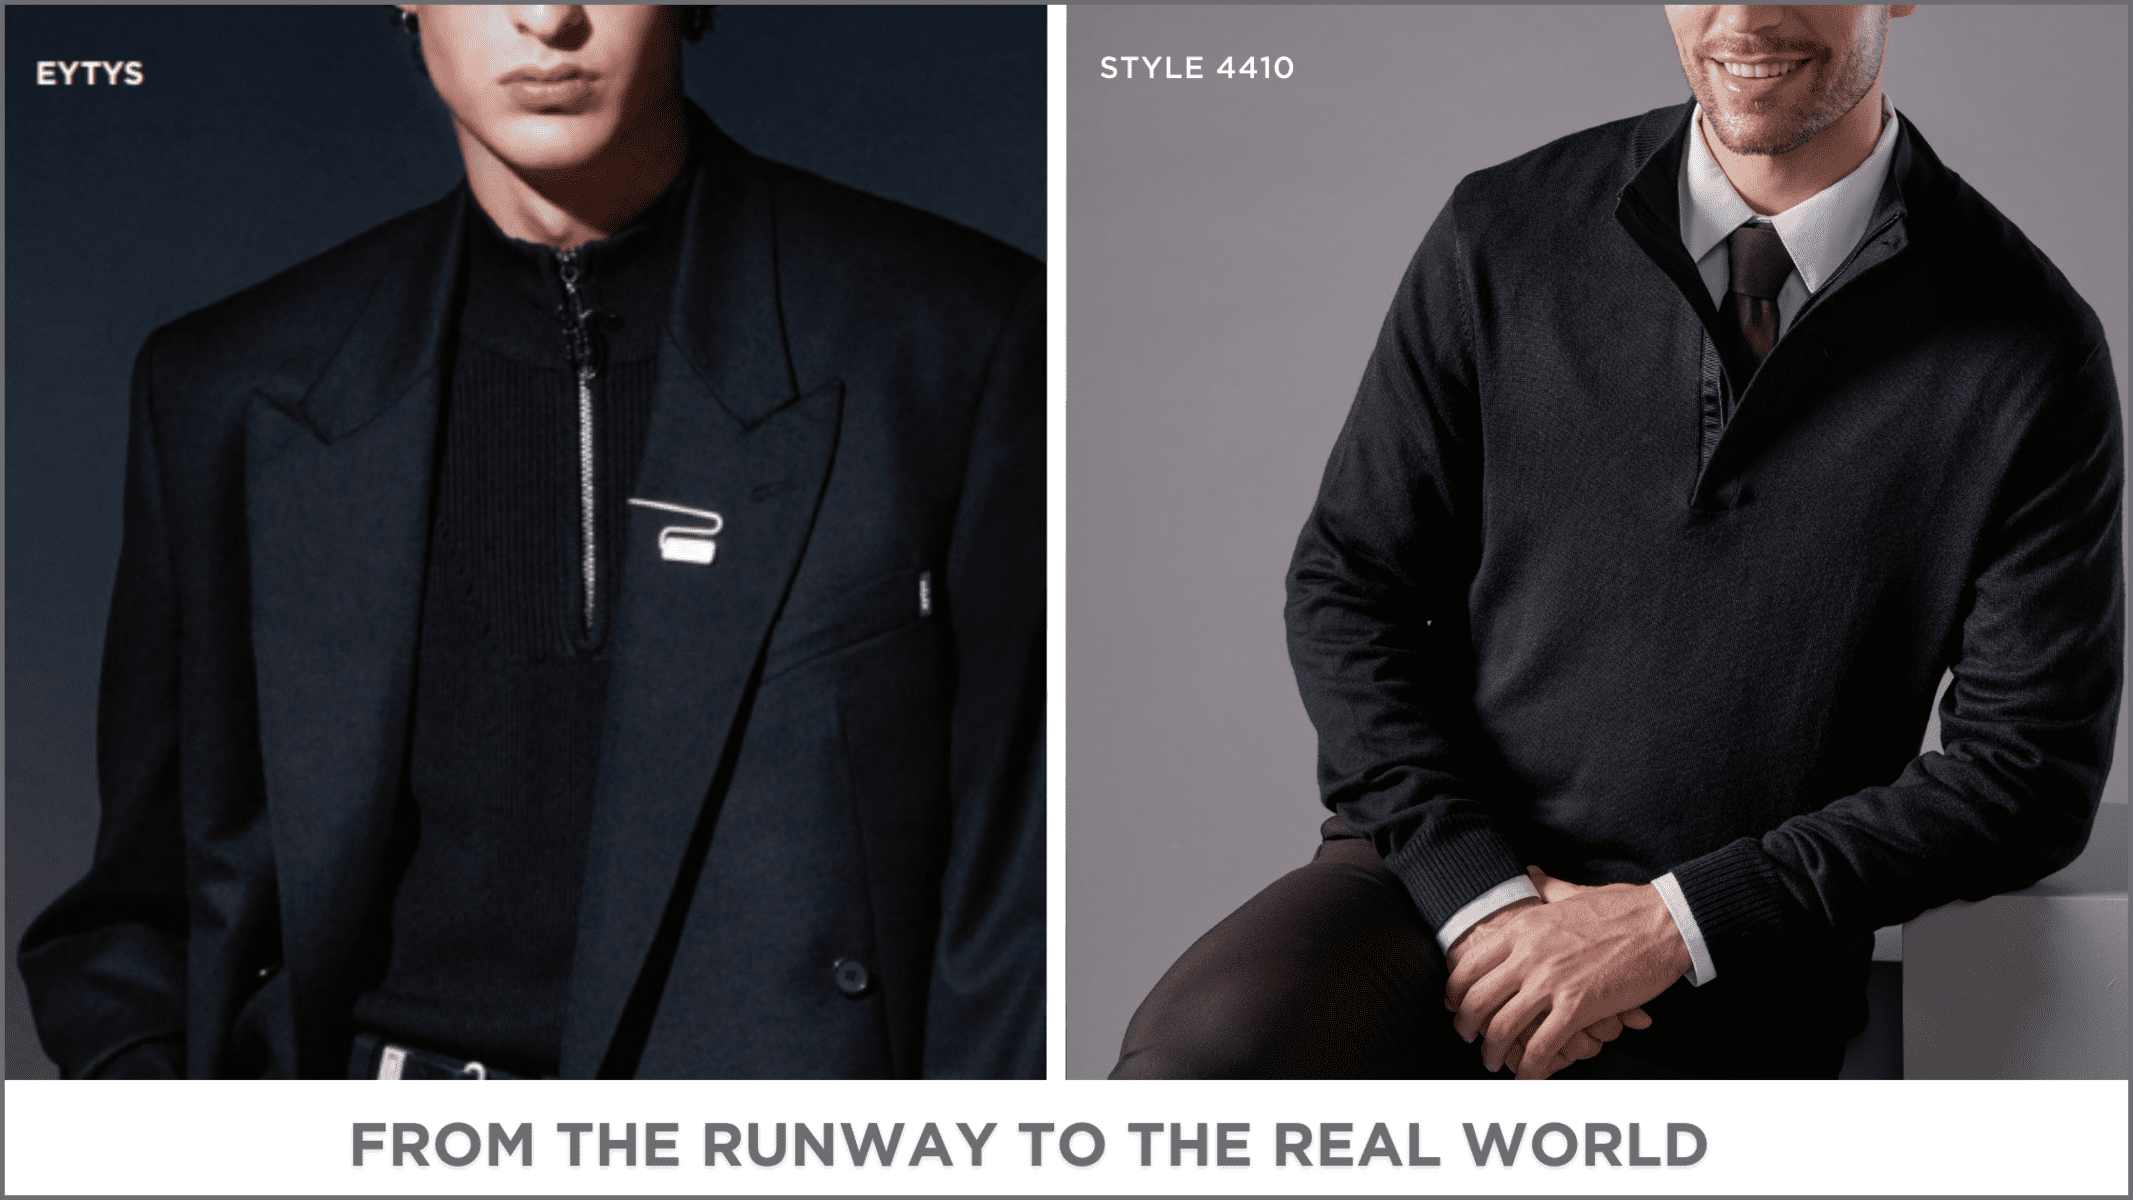 From the runway to the real world.